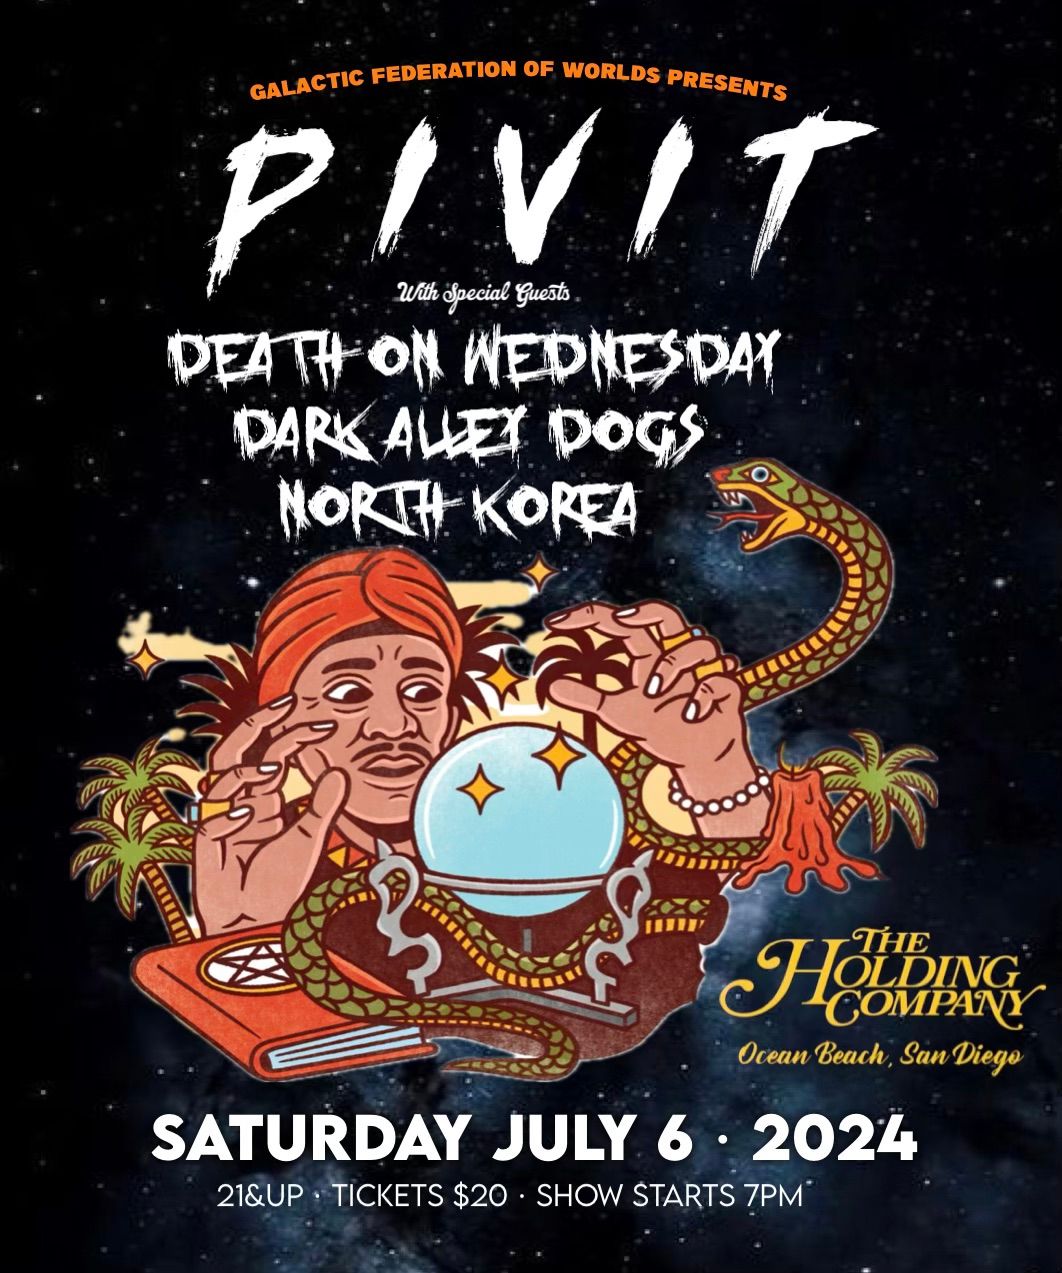 DEATH ON WEDNESDAY with PIVIT, Dark Alley Dogs, and North Korea